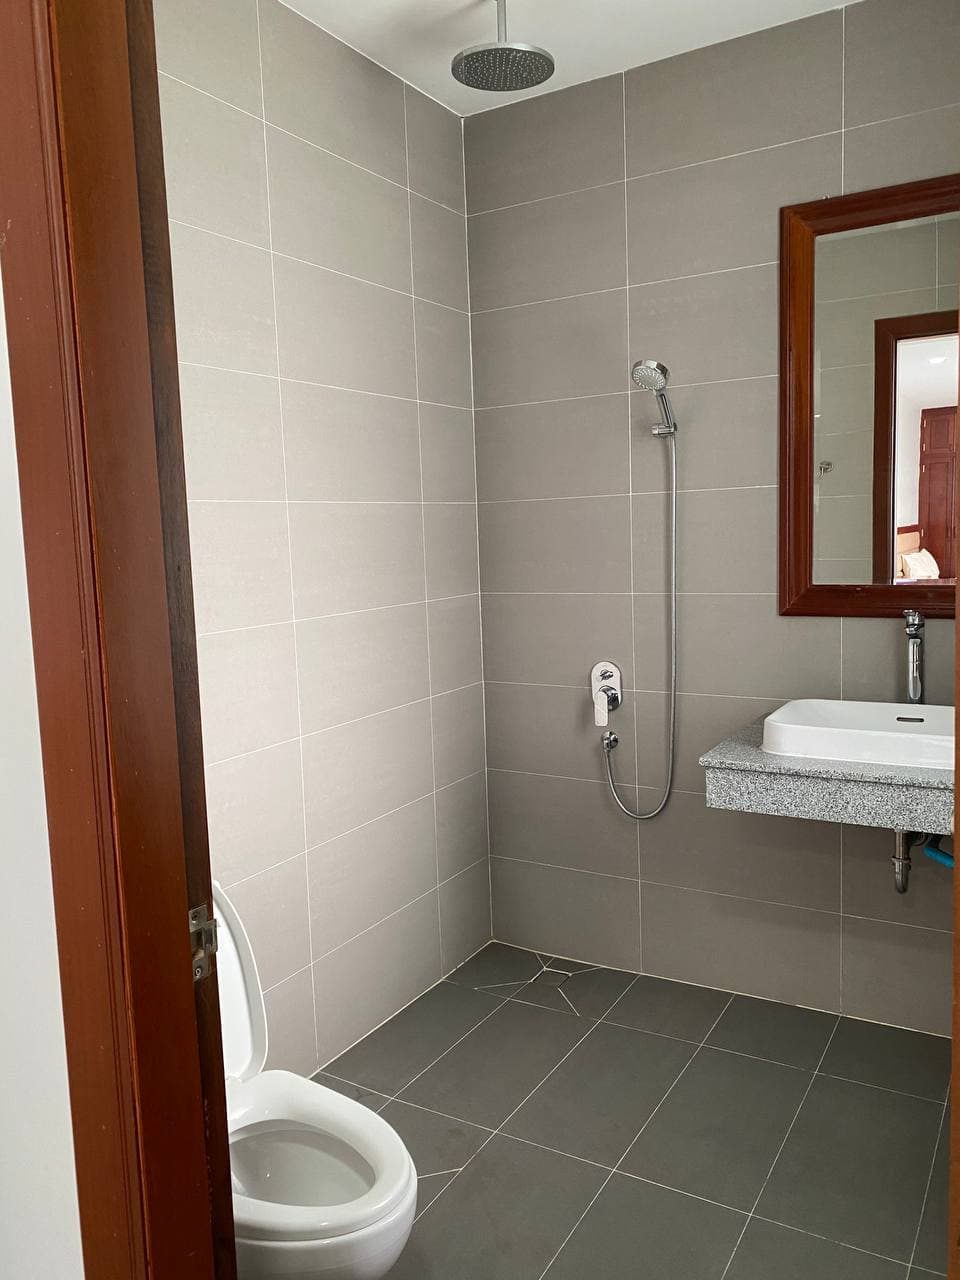 a bathroom of the 2br serviced apartment for rent in Tonle Bassac Phnom Penh Cambodia